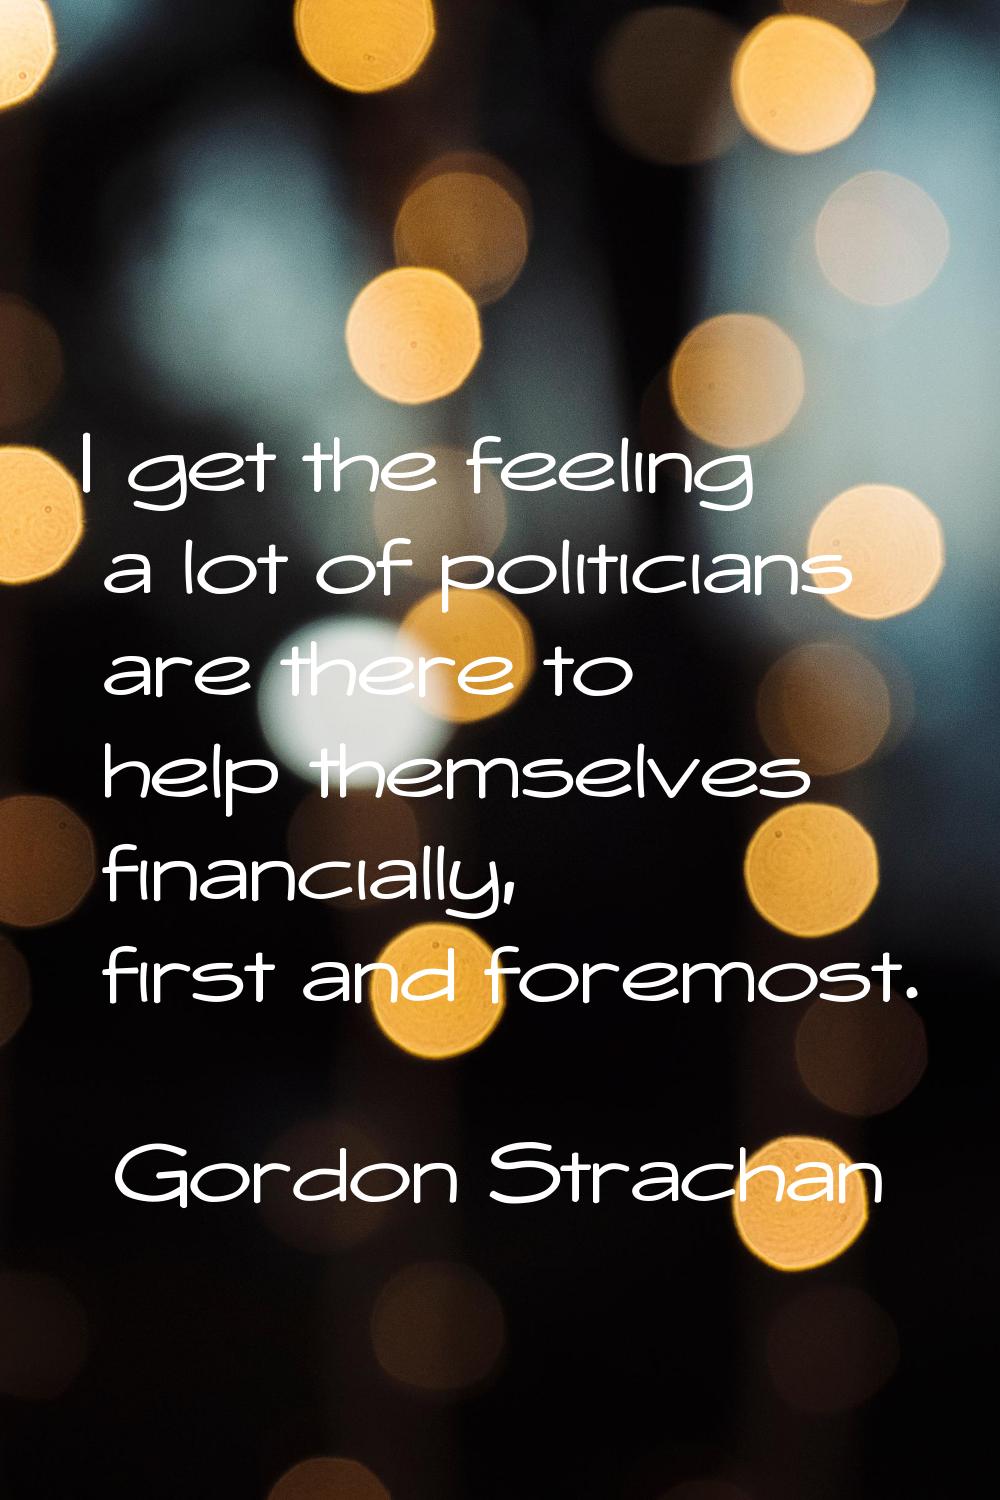 I get the feeling a lot of politicians are there to help themselves financially, first and foremost